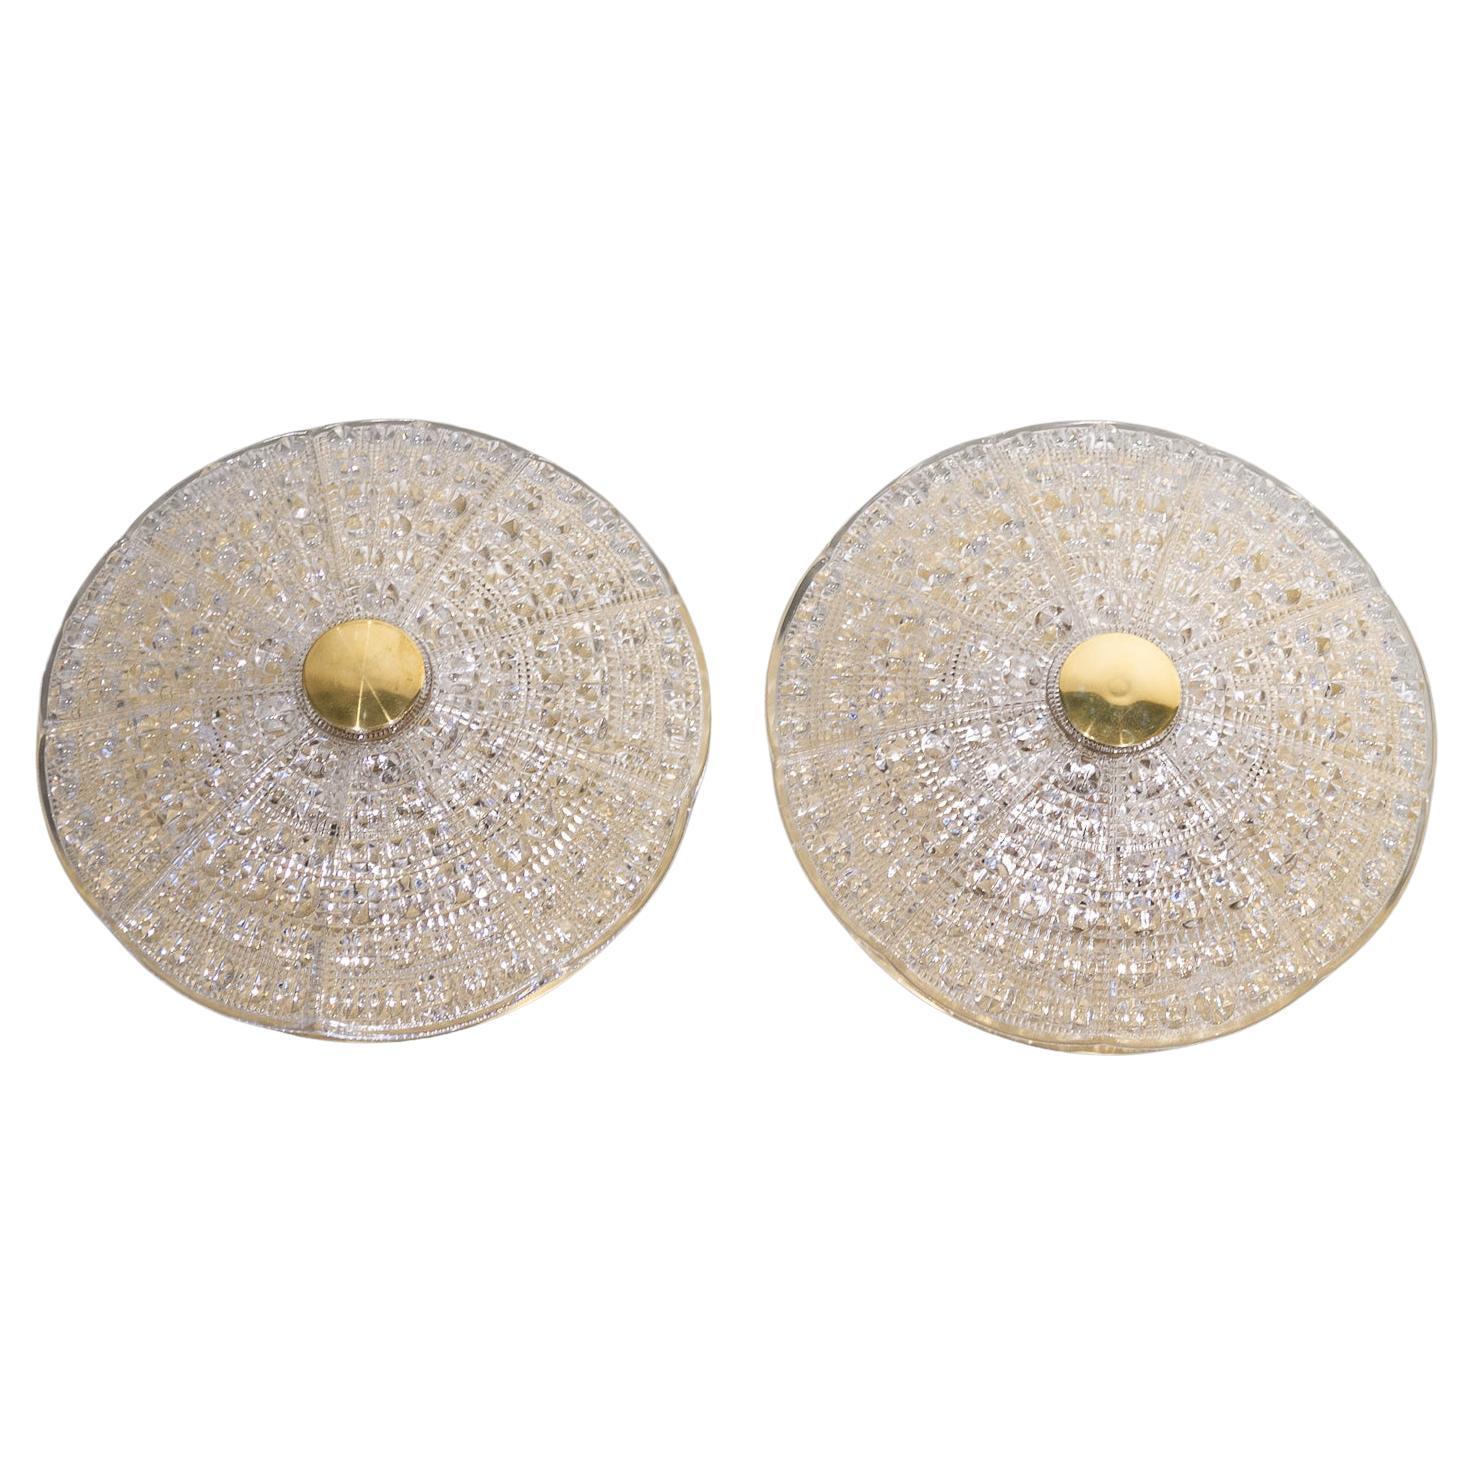 Vintage Crystal Flush Mounted Ceiling Lamps by Carl Fagerlund, 1960s. Set of 2. For Sale